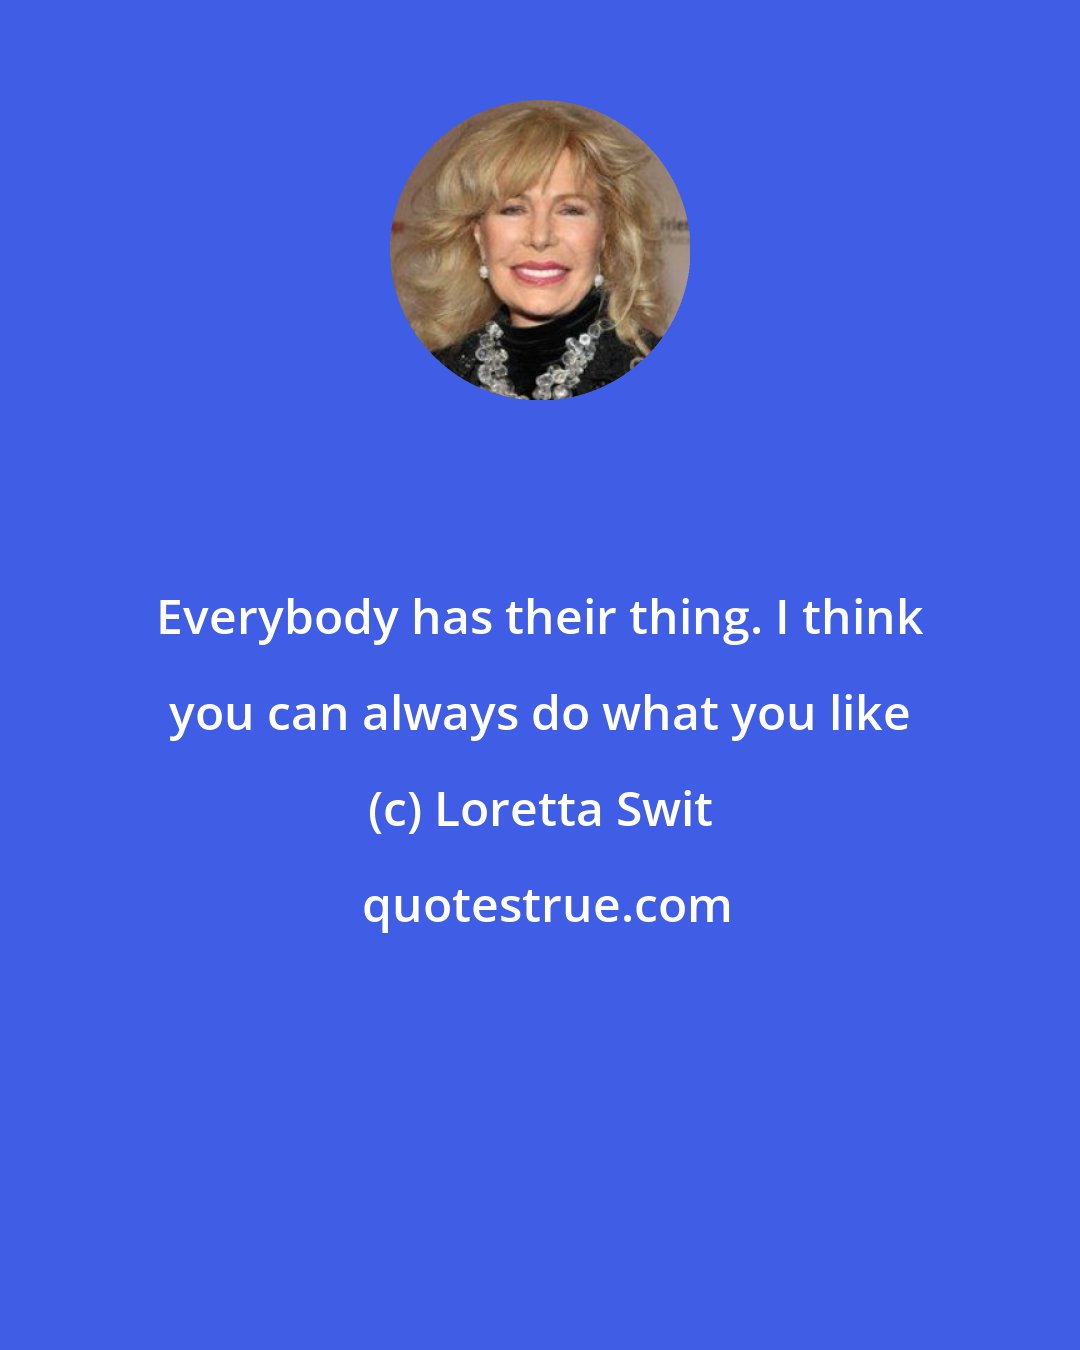 Loretta Swit: Everybody has their thing. I think you can always do what you like